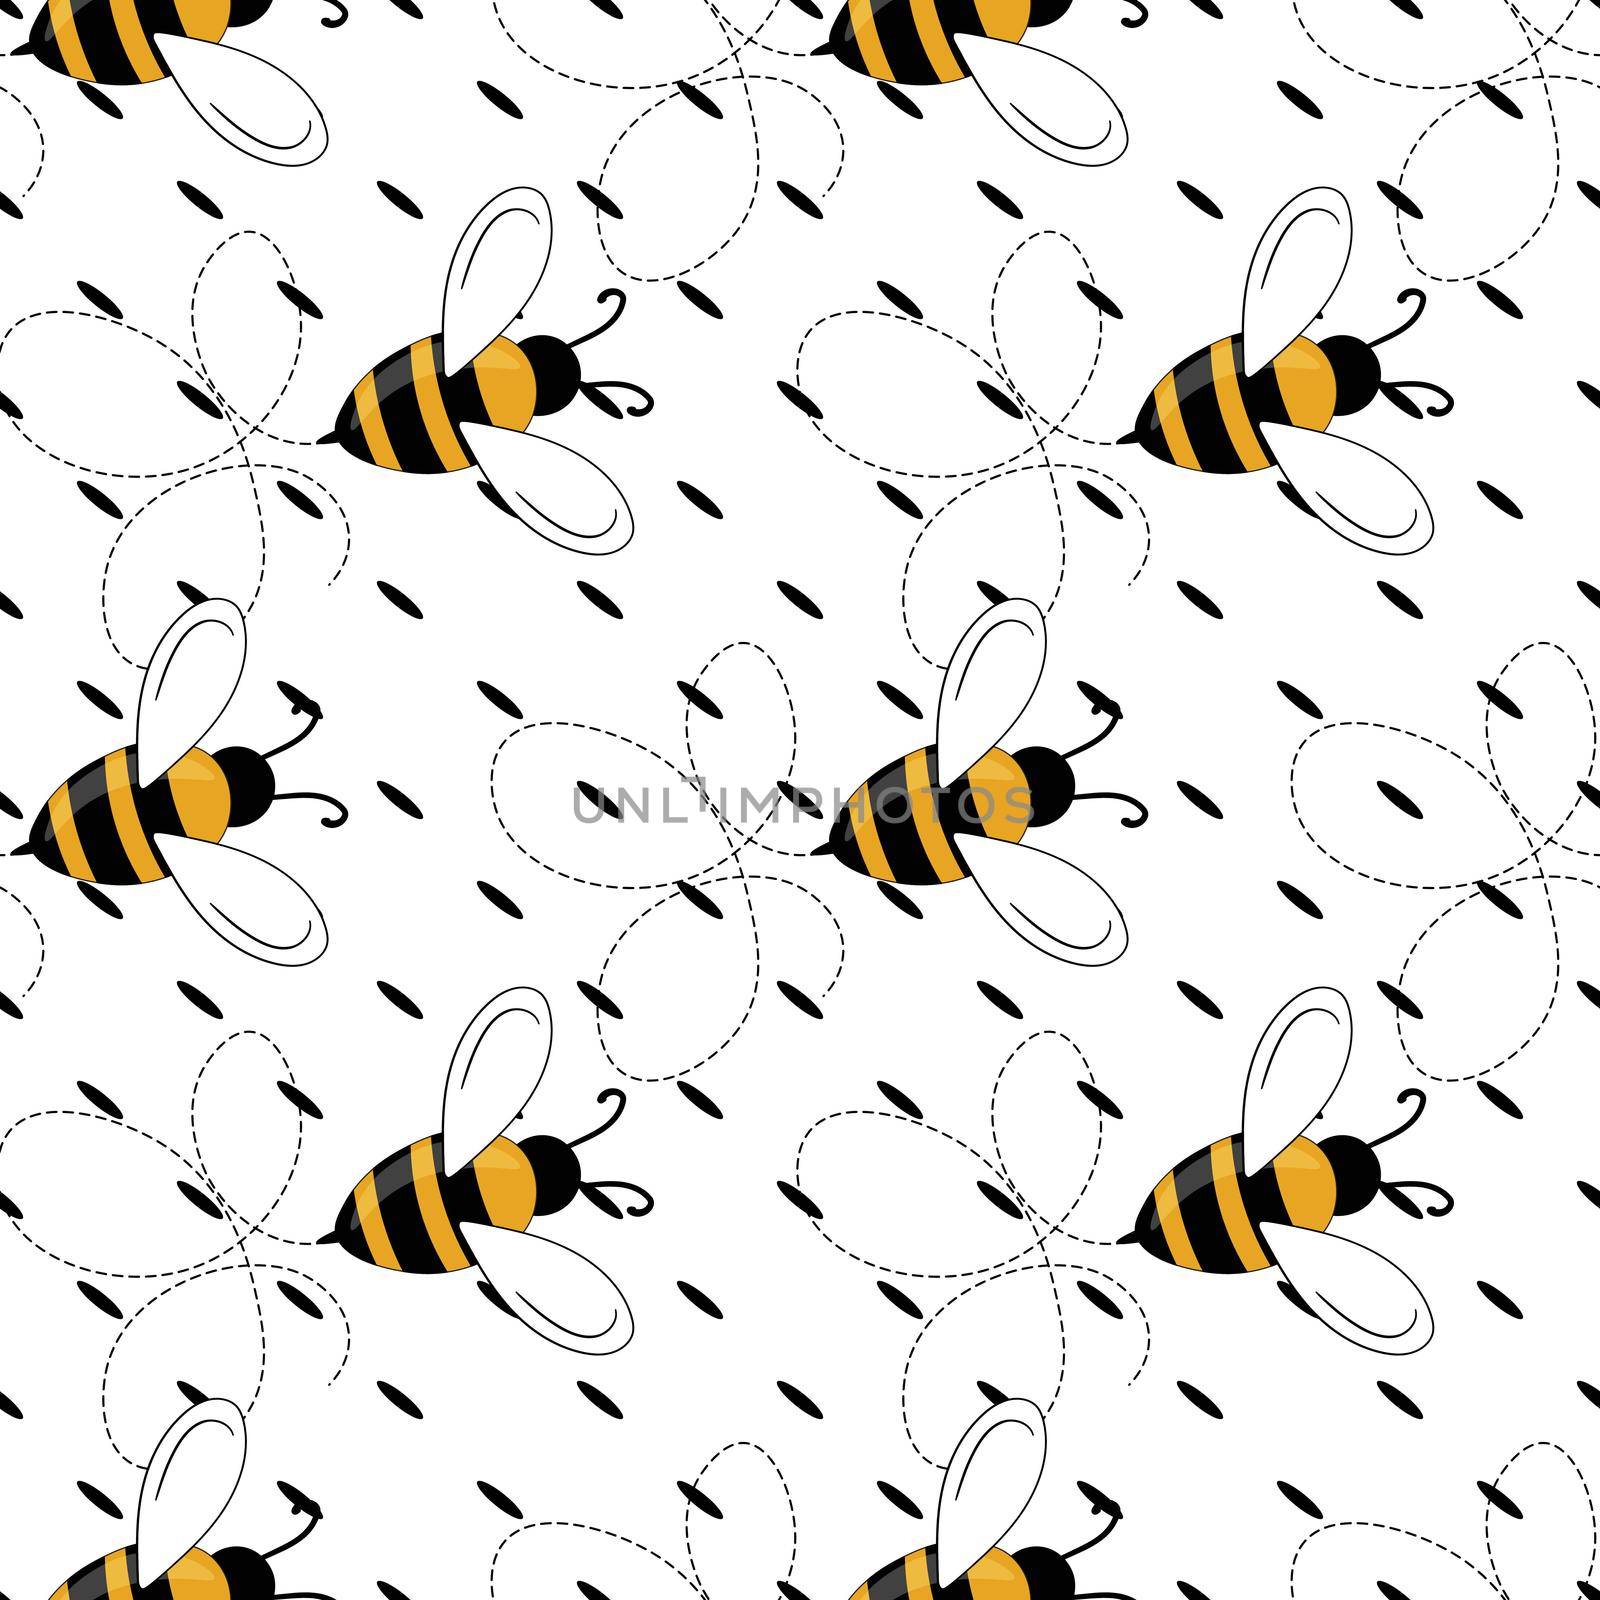 Seamless pattern with bees on white polka dots background. Small wasp. Vector illustration. Adorable cartoon character. Template design for invitation, cards, textile, fabric. Doodle style.